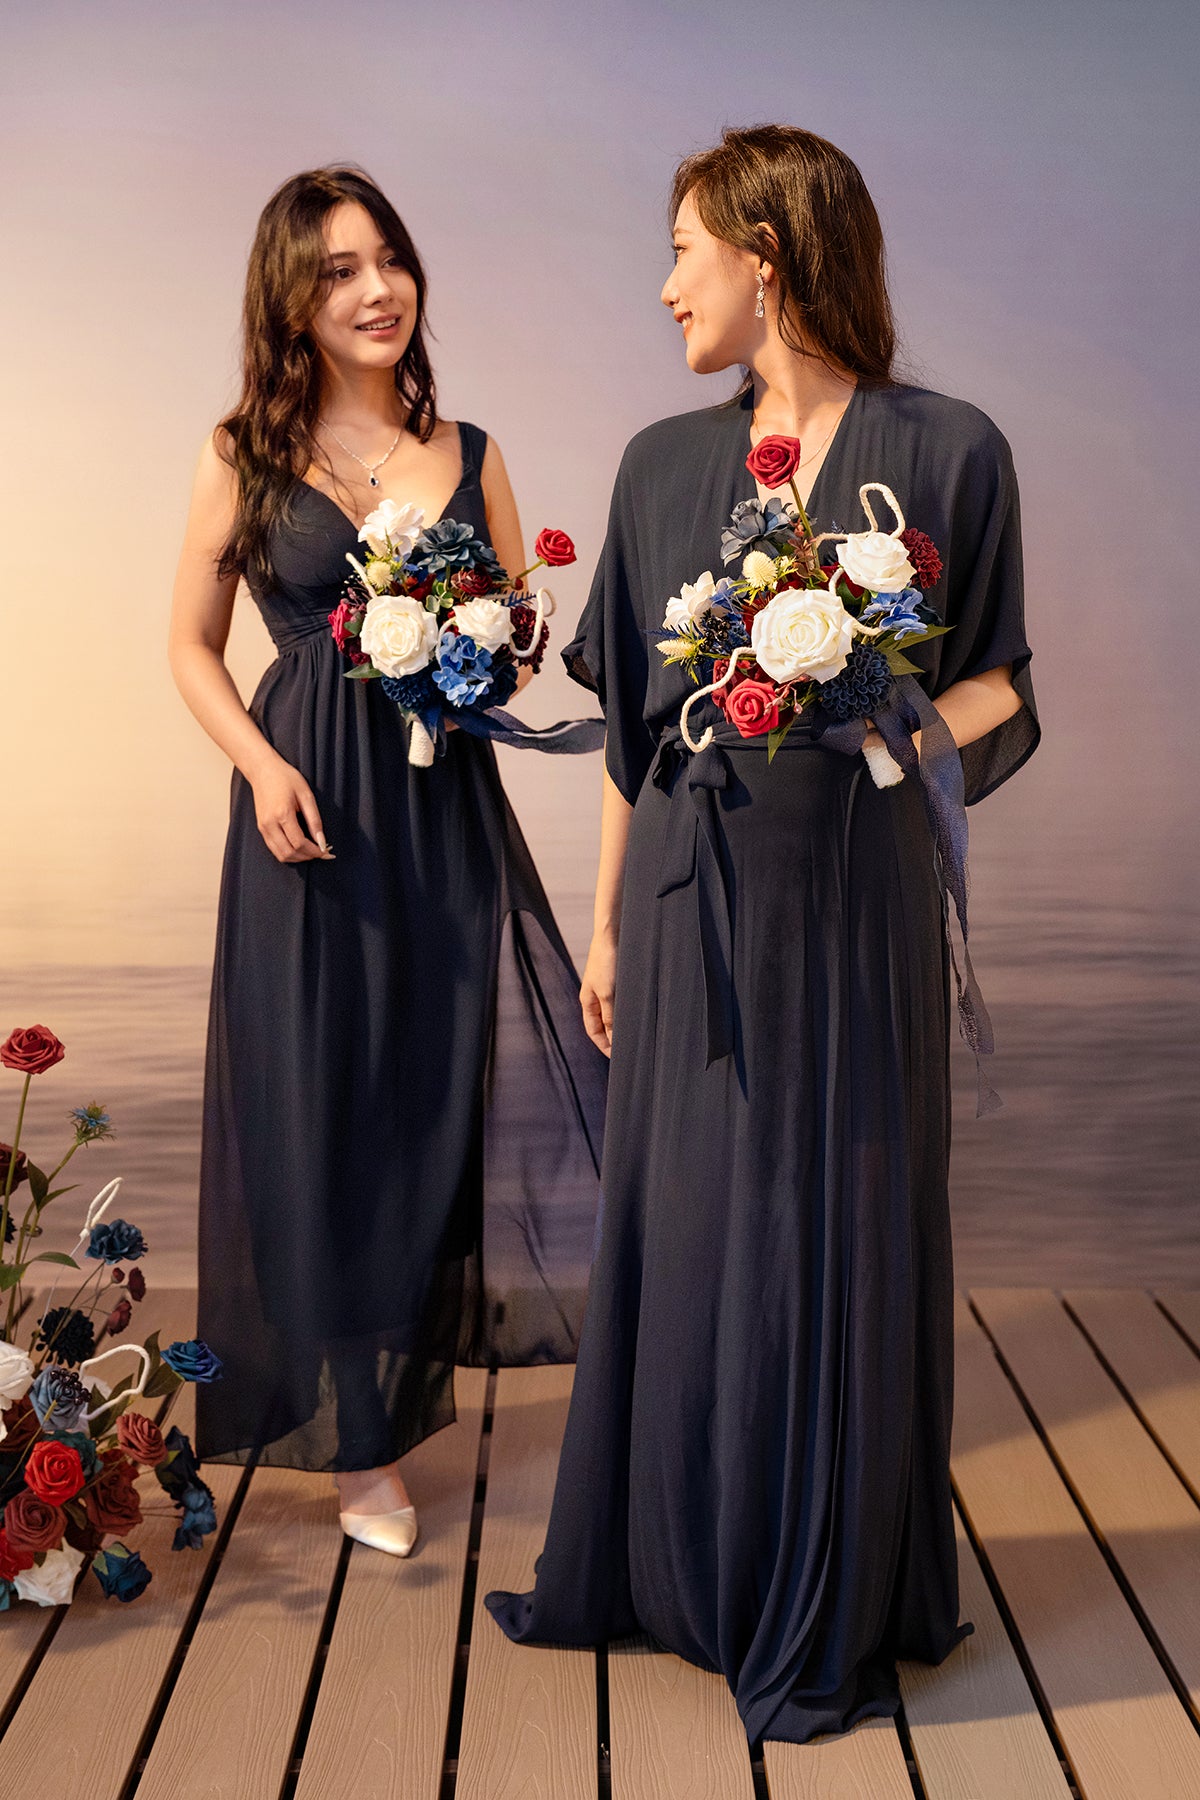 Bridesmaid Bouquets in Nautical Navy & Burgundy